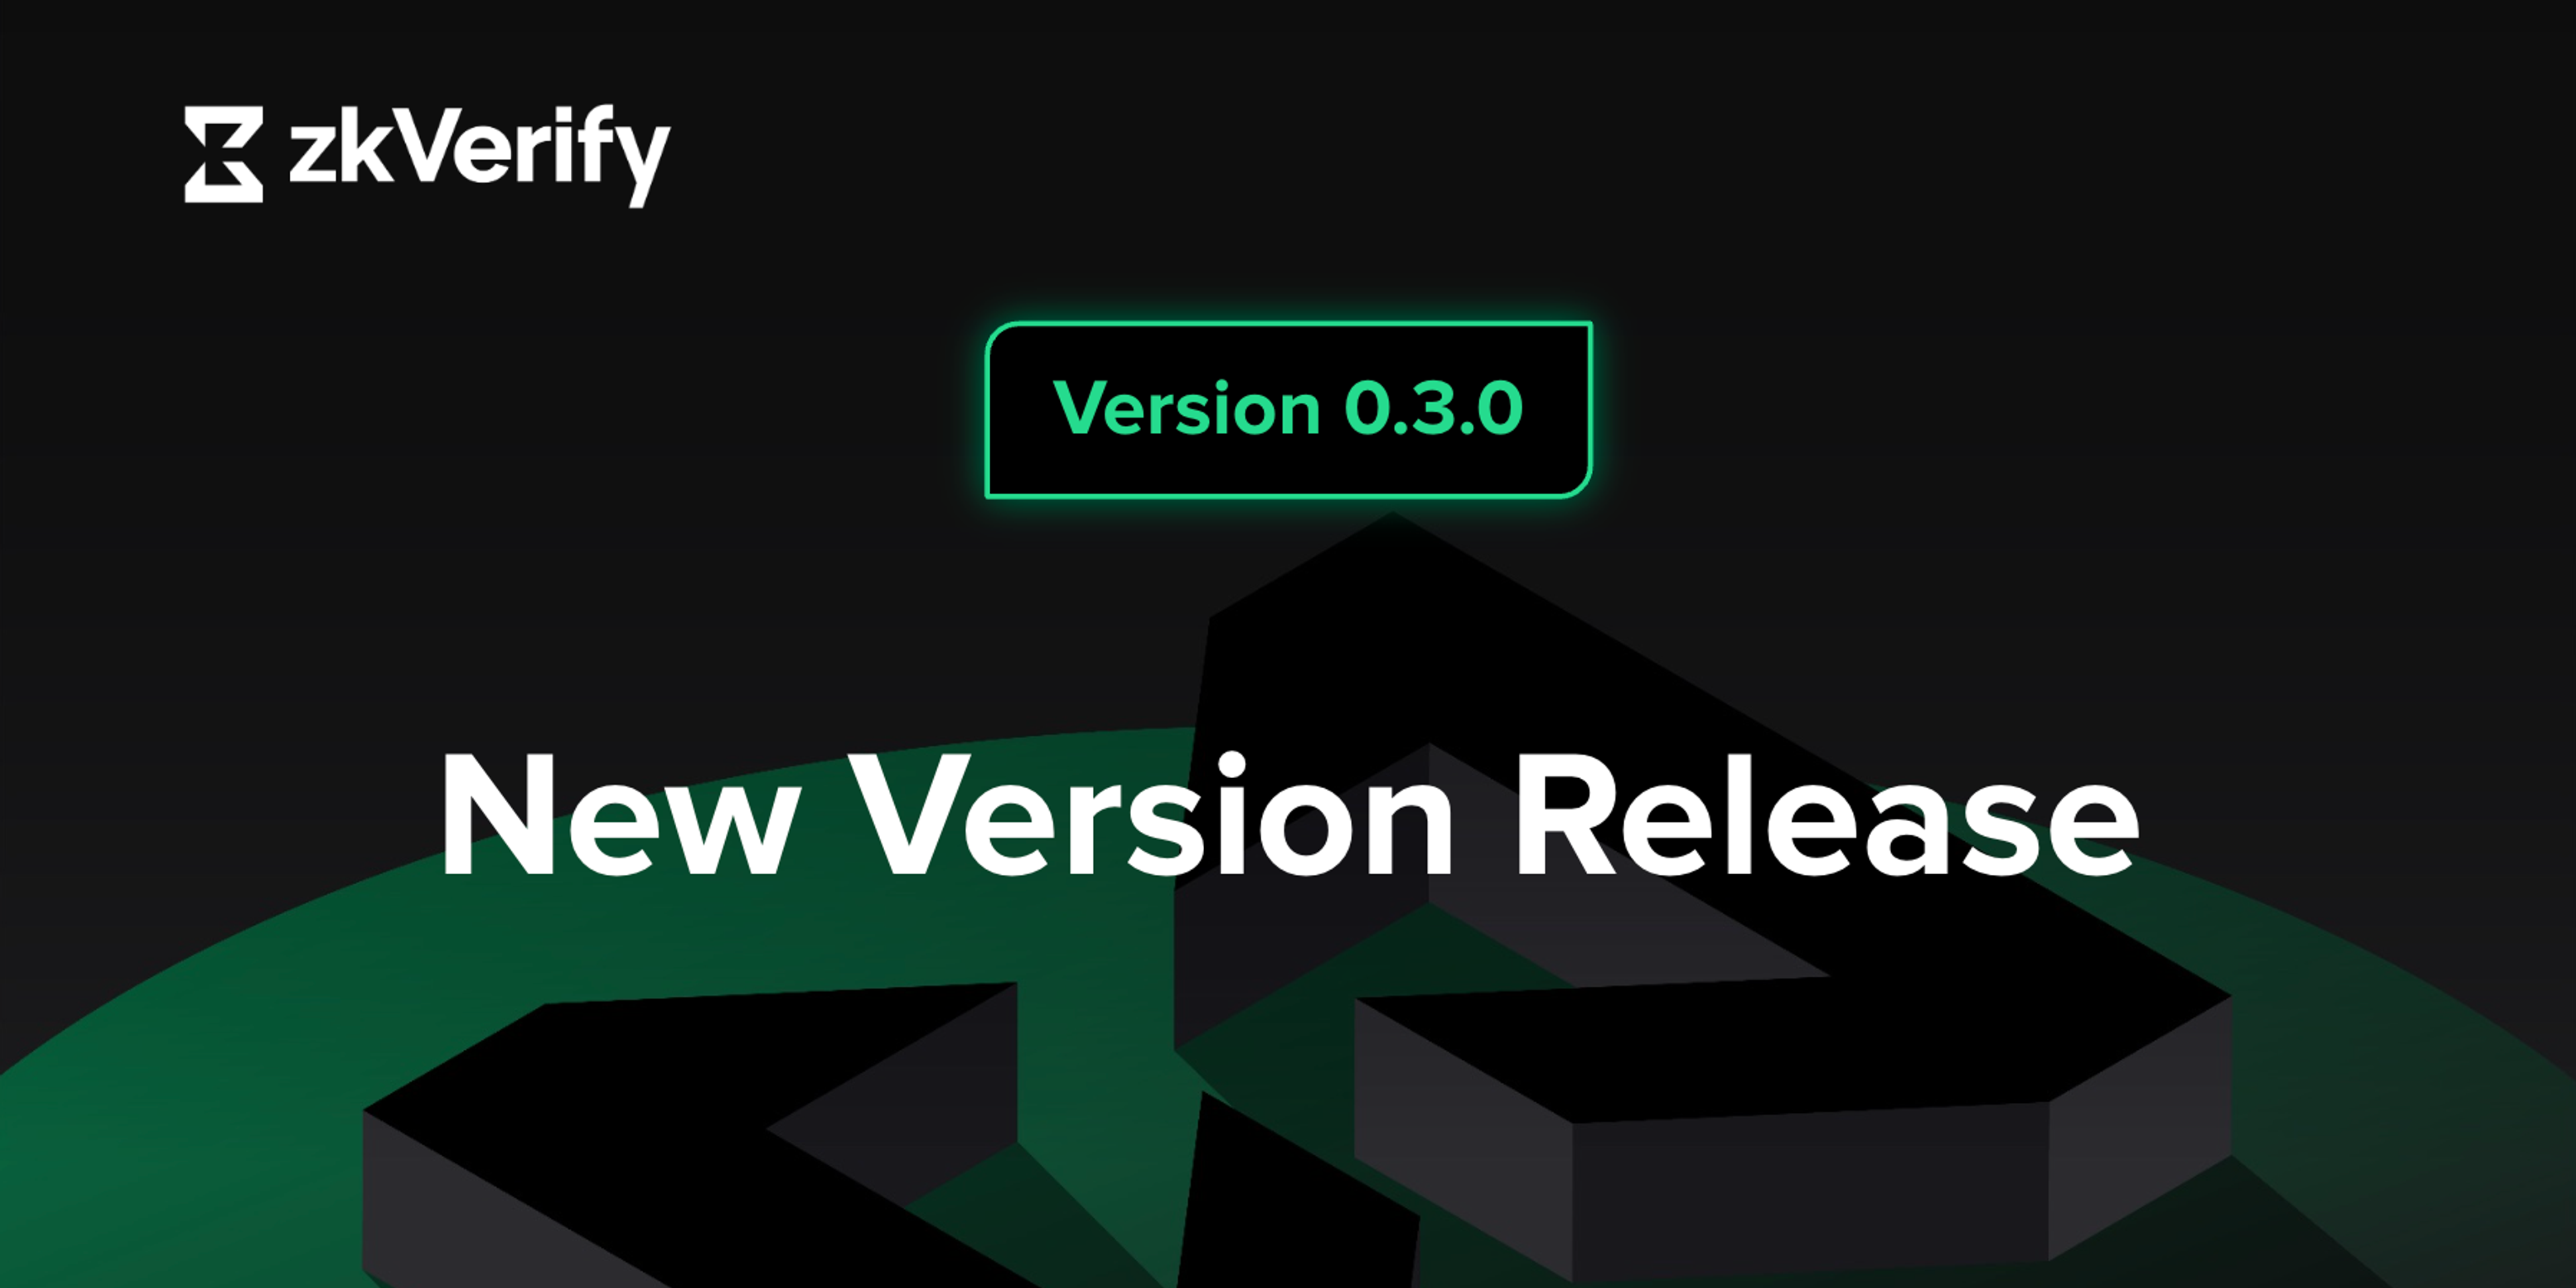 a new version of zkverify is being released